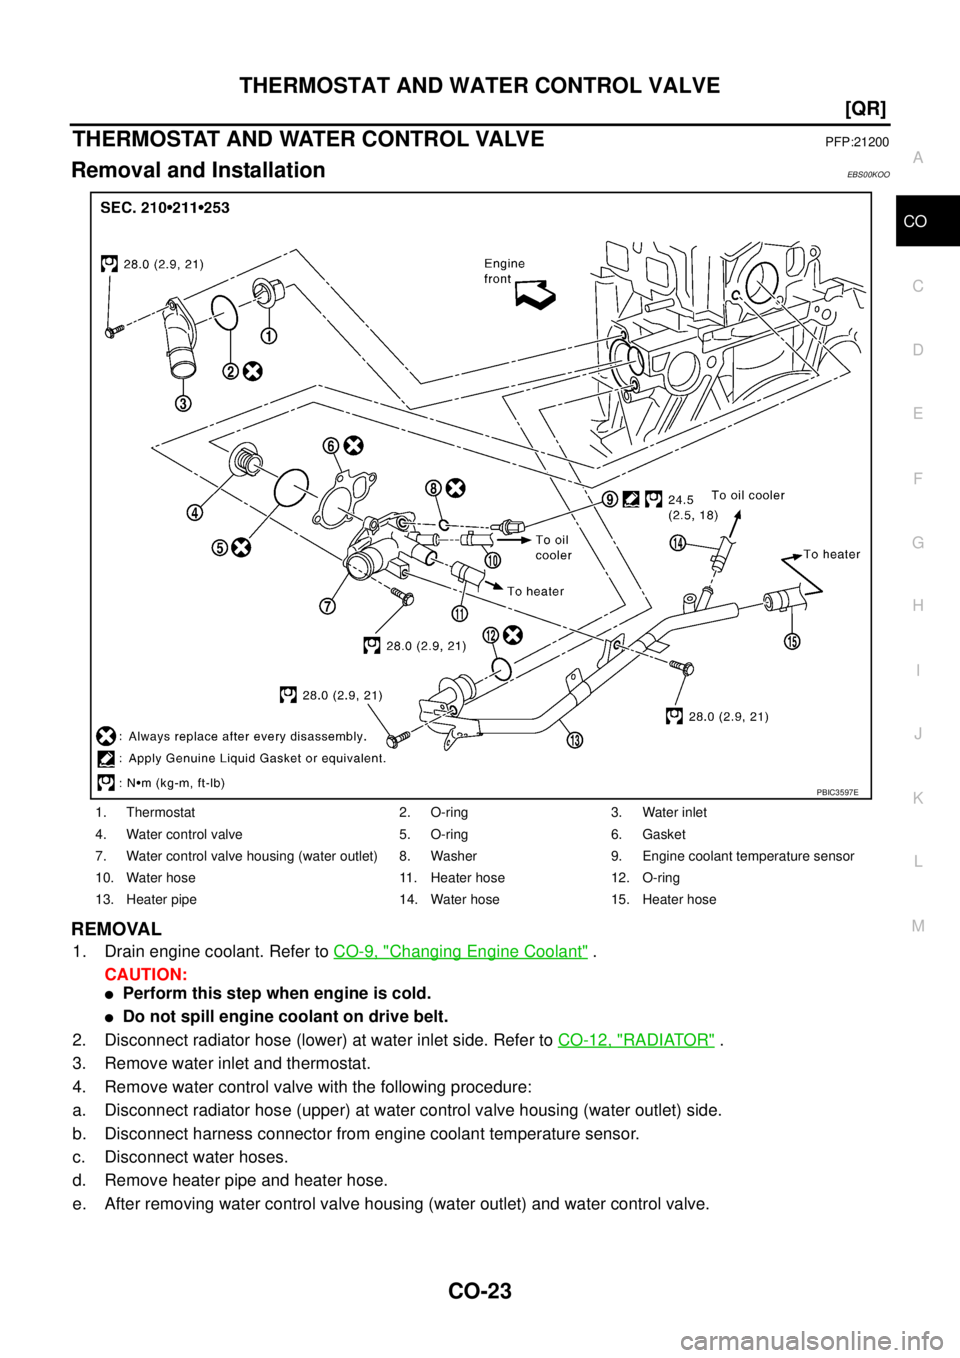 NISSAN X-TRAIL 2005  Service Repair Manual THERMOSTAT AND WATER CONTROL VALVE
CO-23
[QR]
C
D
E
F
G
H
I
J
K
L
MA
CO
 
THERMOSTAT AND WATER CONTROL VALVEPFP:21200
Removal and InstallationEBS00KOO
REMOVAL
1. Drain engine coolant. Refer to CO-9, "